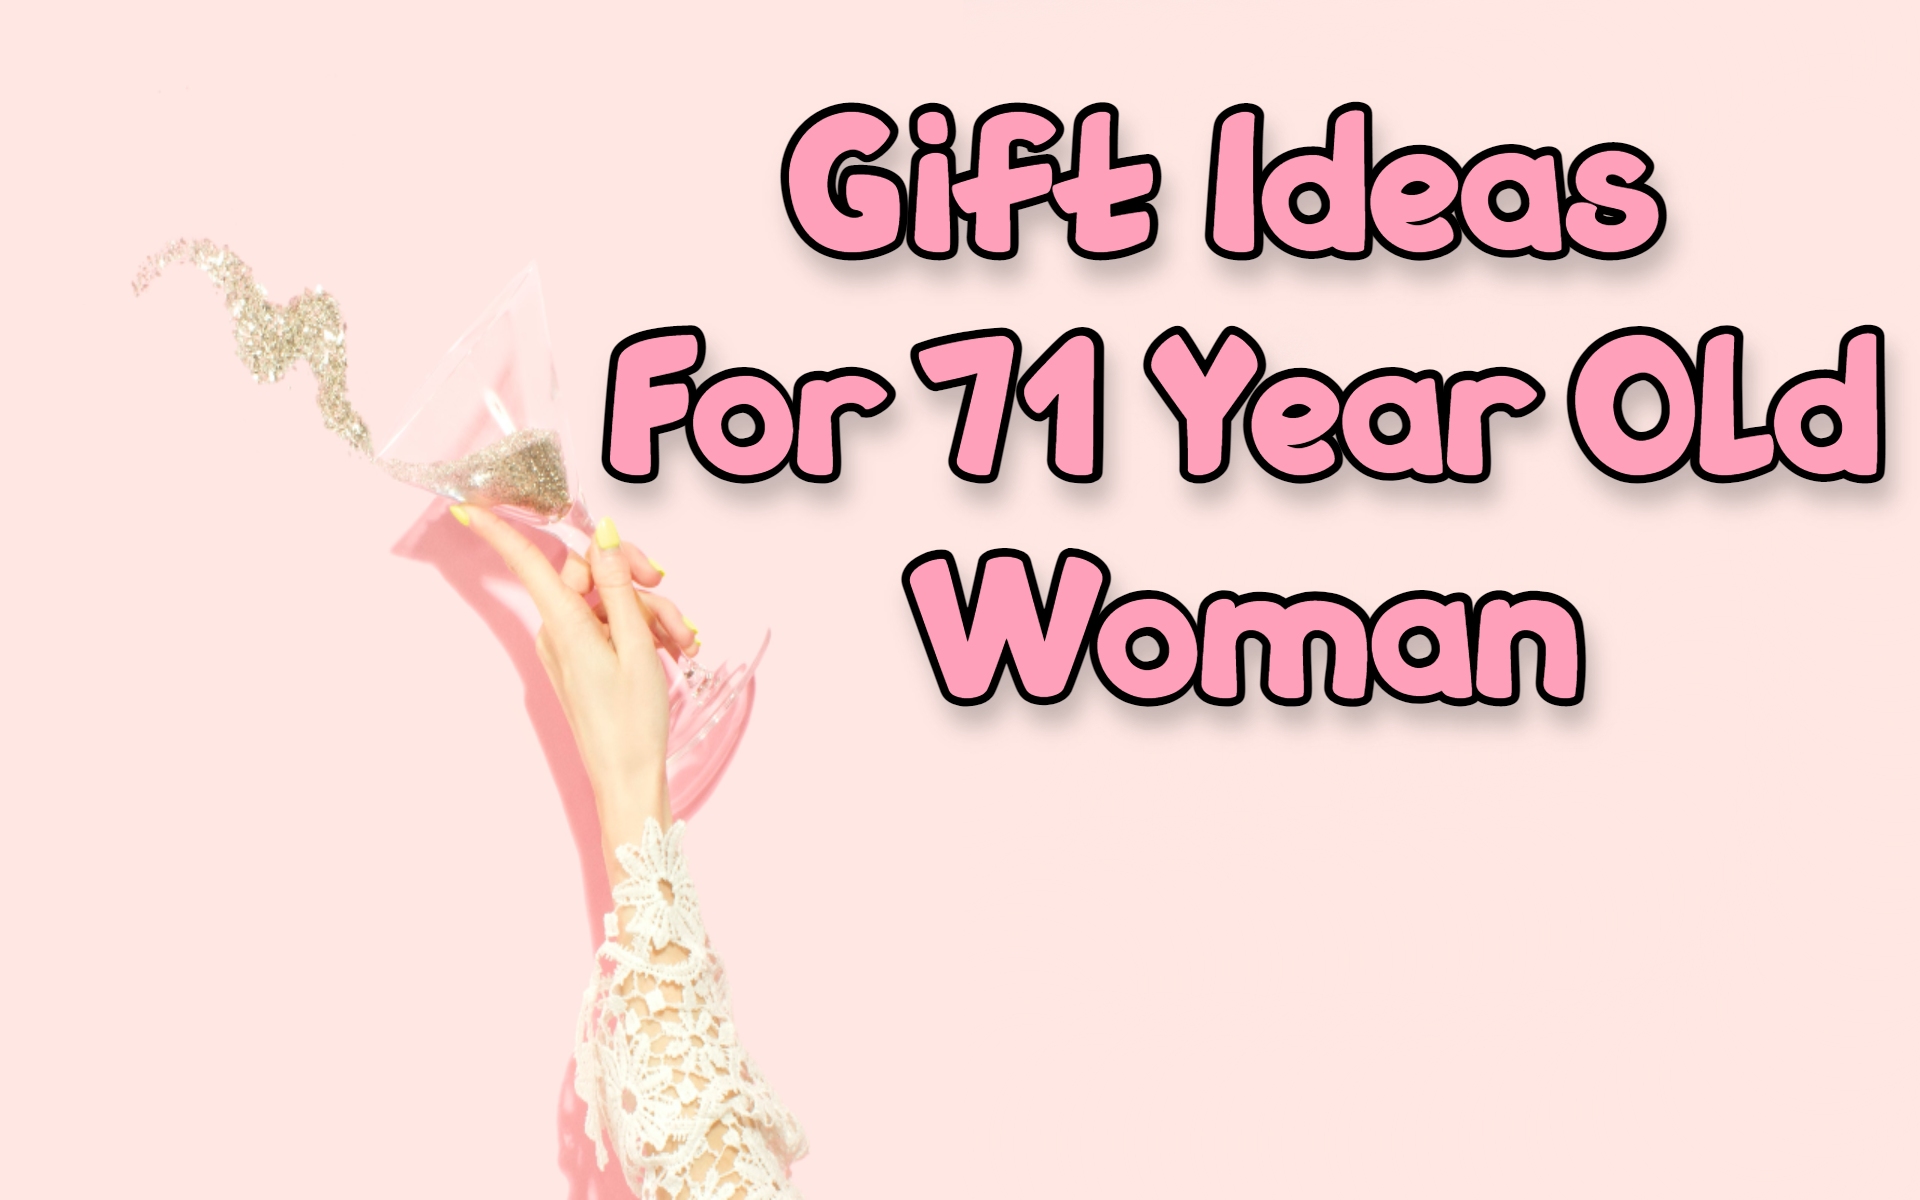 Cover image of gift ideas for 71-year-old woman by Giftsedge